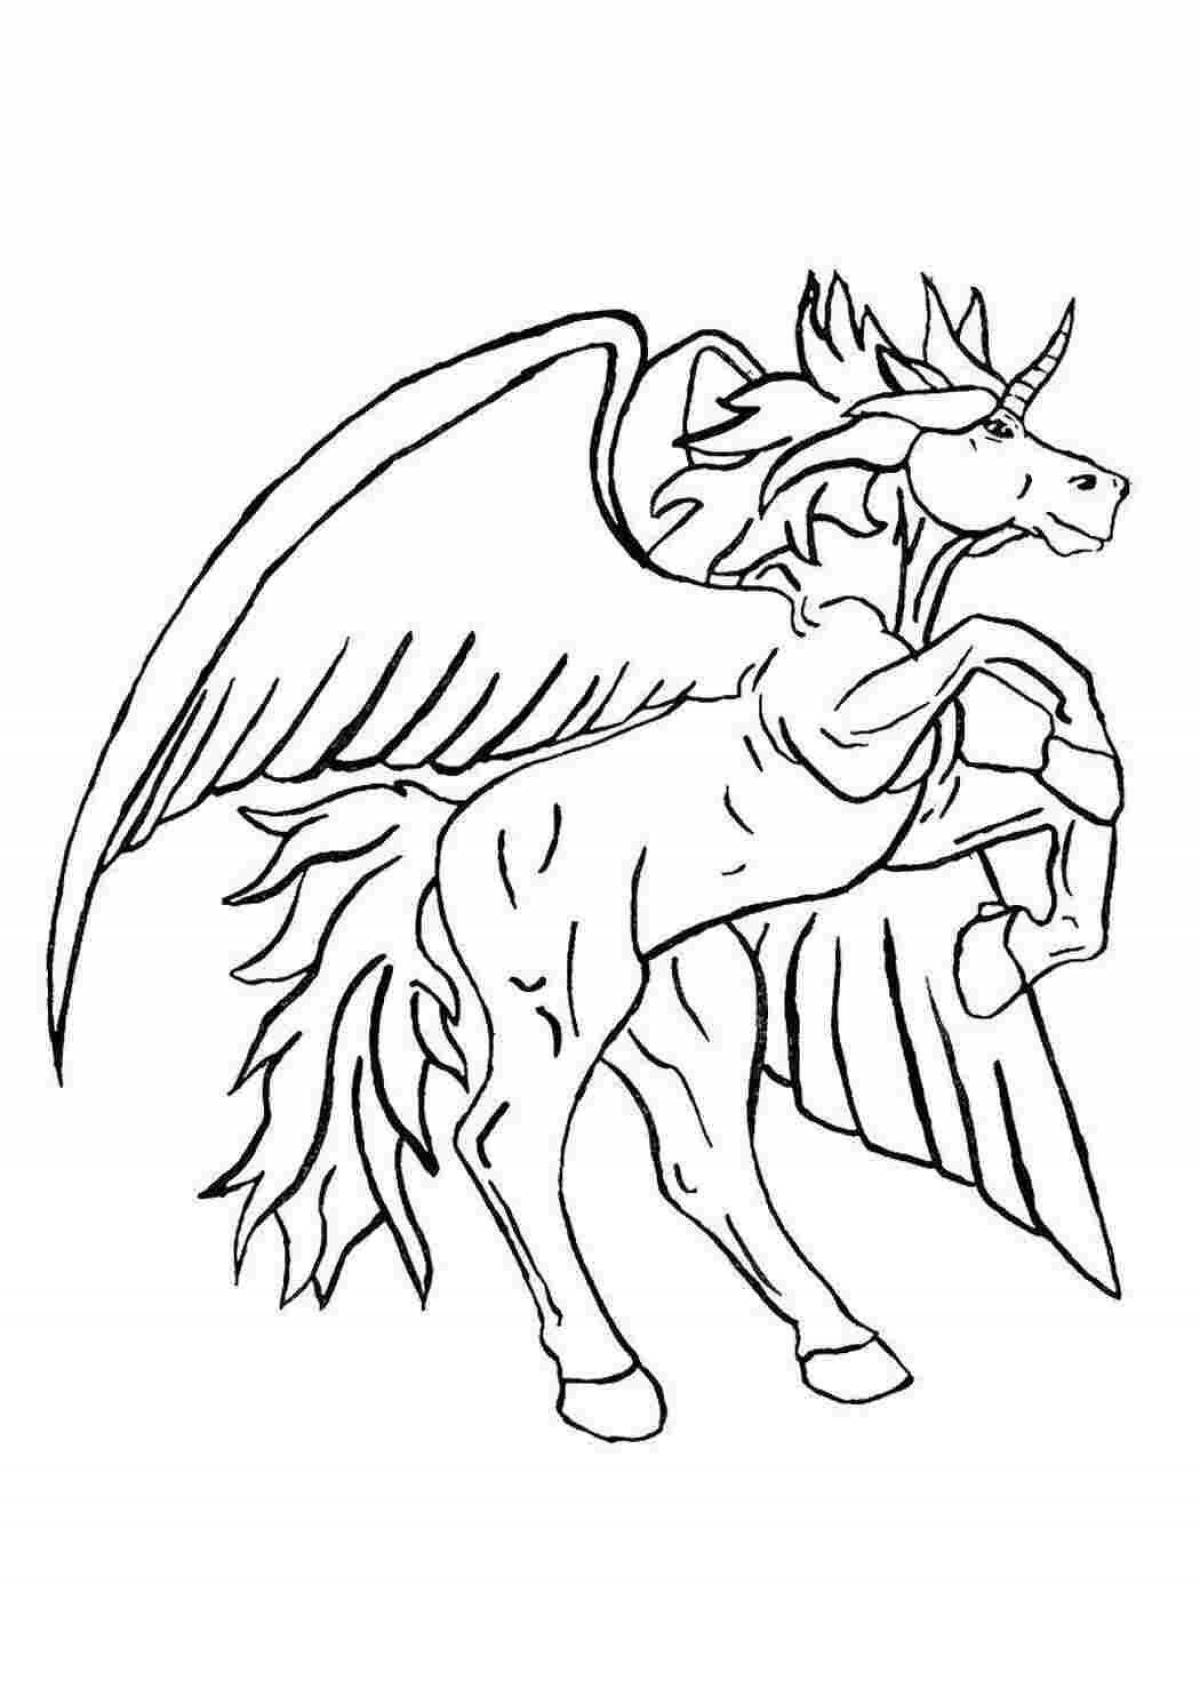 Violent coloring unicorn with wings